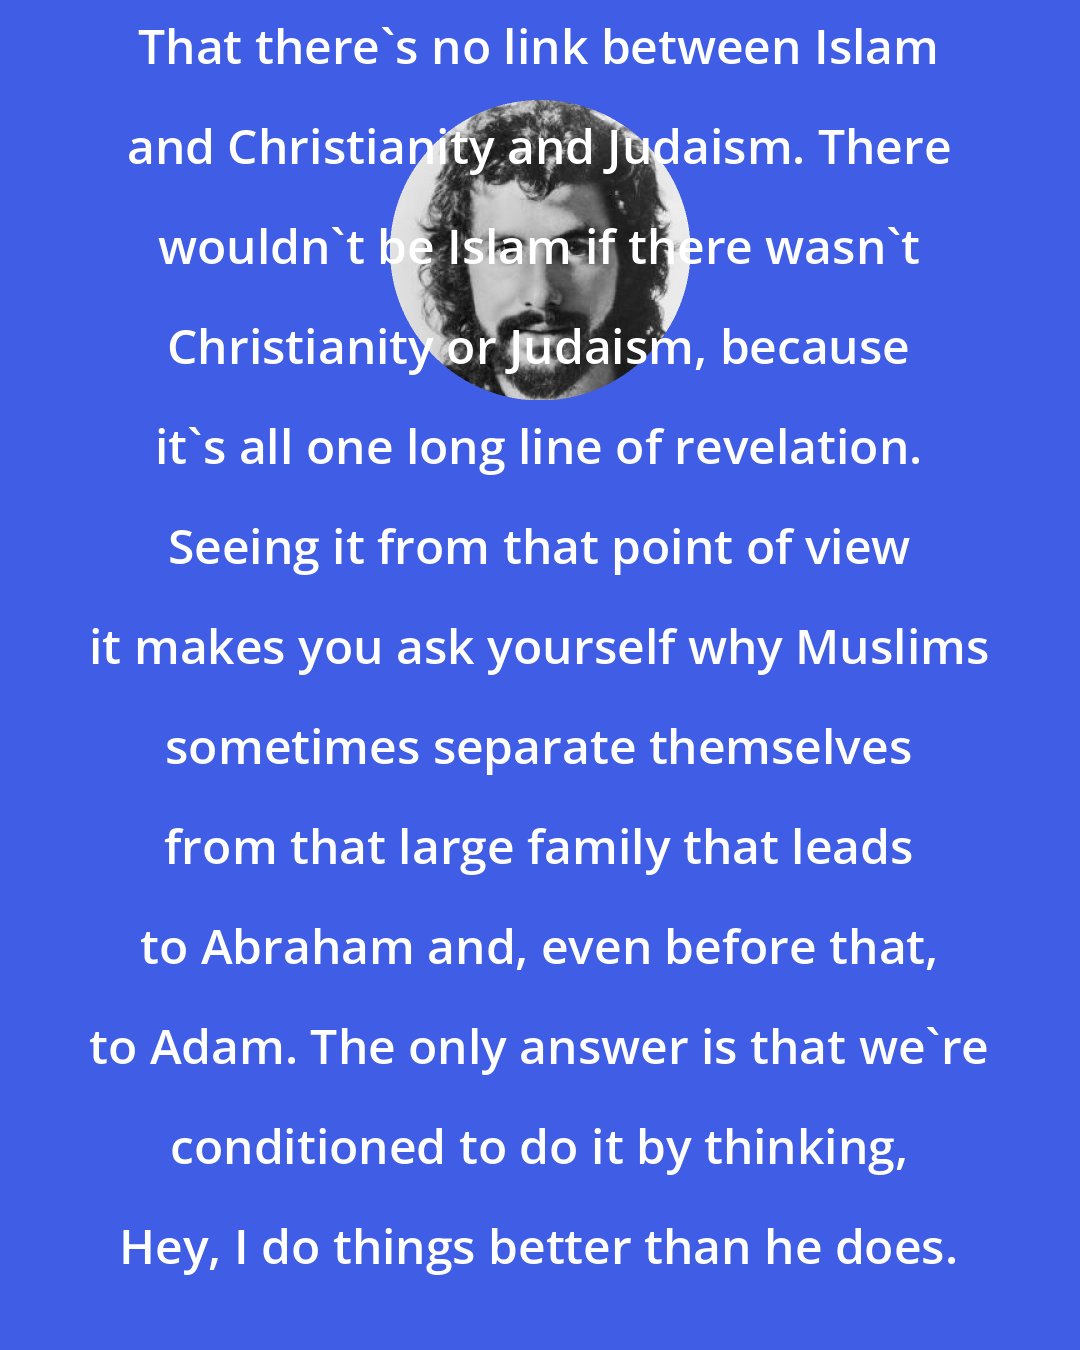 Cat Stevens: That there's no link between Islam and Christianity and Judaism. There wouldn't be Islam if there wasn't Christianity or Judaism, because it's all one long line of revelation. Seeing it from that point of view it makes you ask yourself why Muslims sometimes separate themselves from that large family that leads to Abraham and, even before that, to Adam. The only answer is that we're conditioned to do it by thinking, Hey, I do things better than he does.